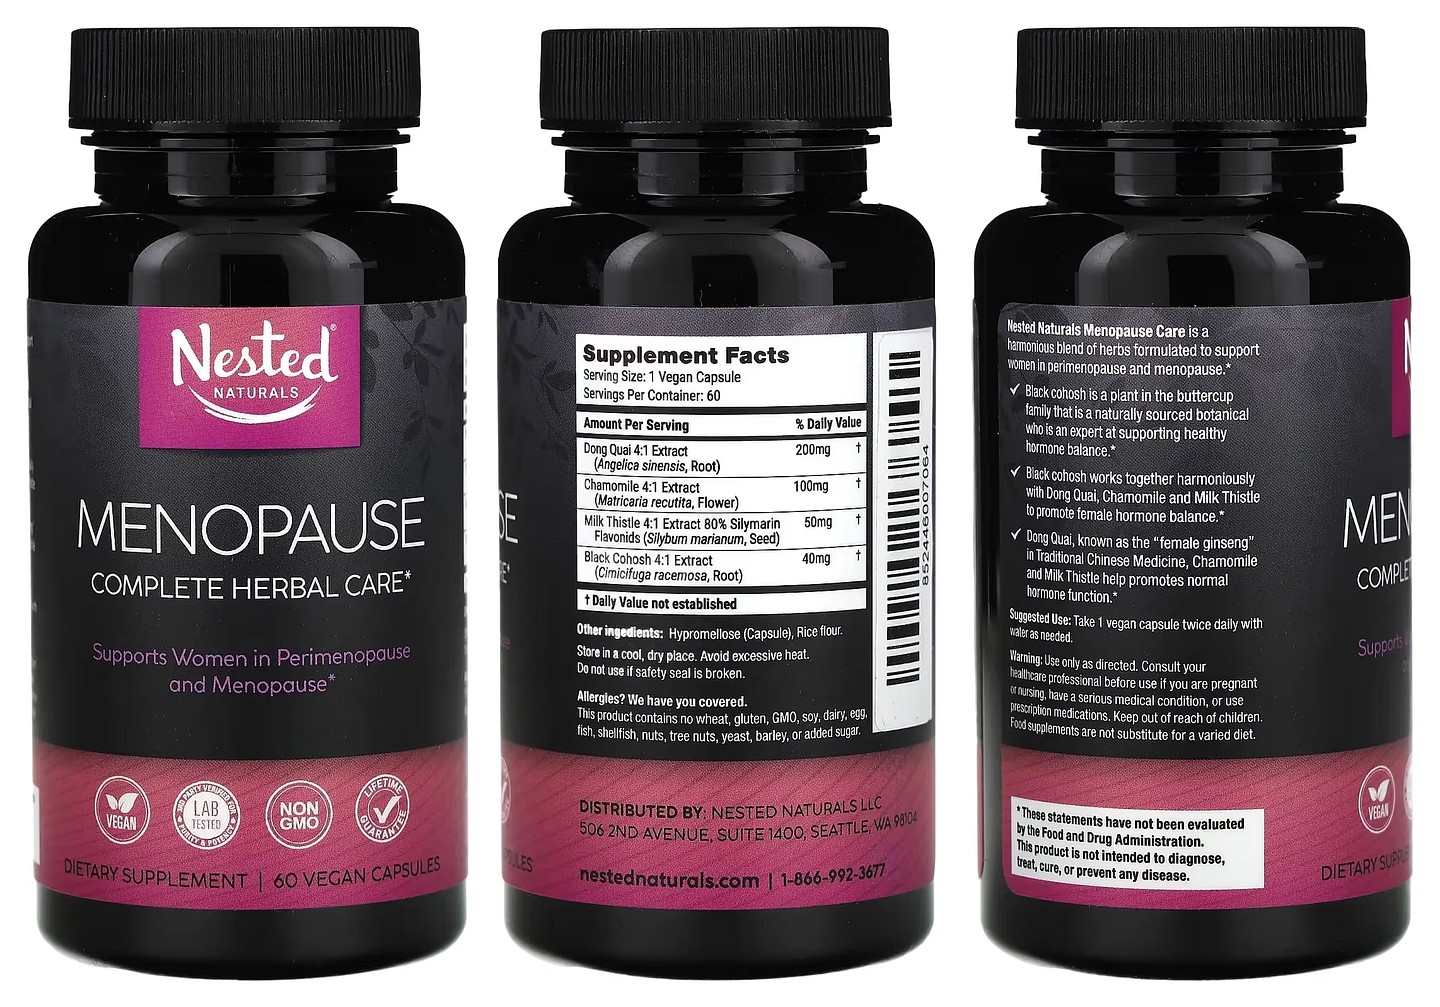 Nested Naturals, Menopause Complete Herbal Care packaging